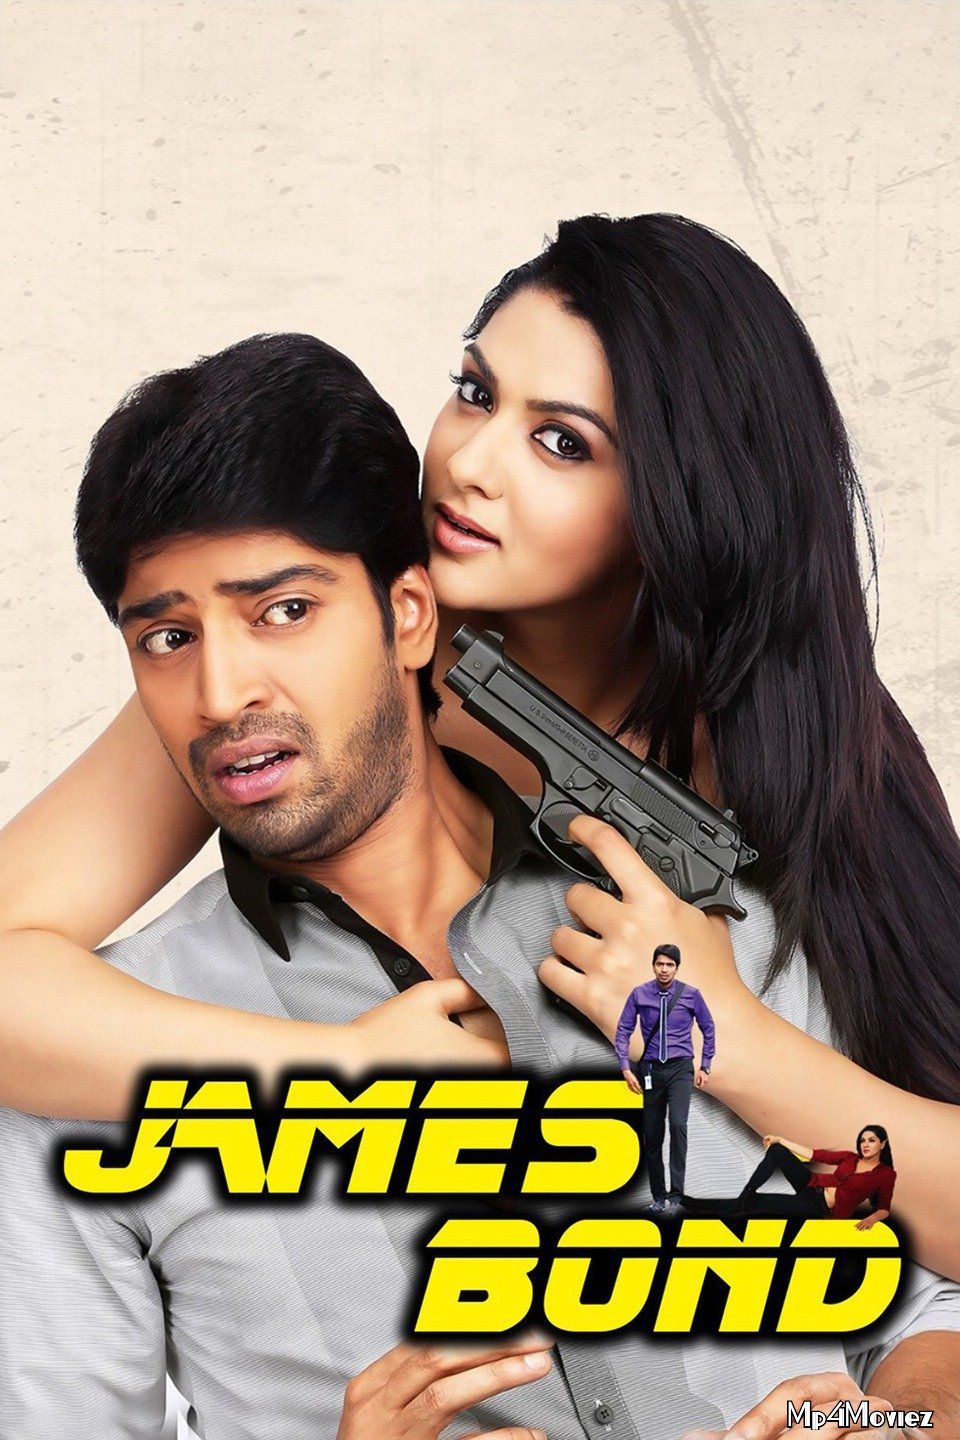 Lady Gangster (James Bond) 2021 Hindi Dubbed HDRip download full movie